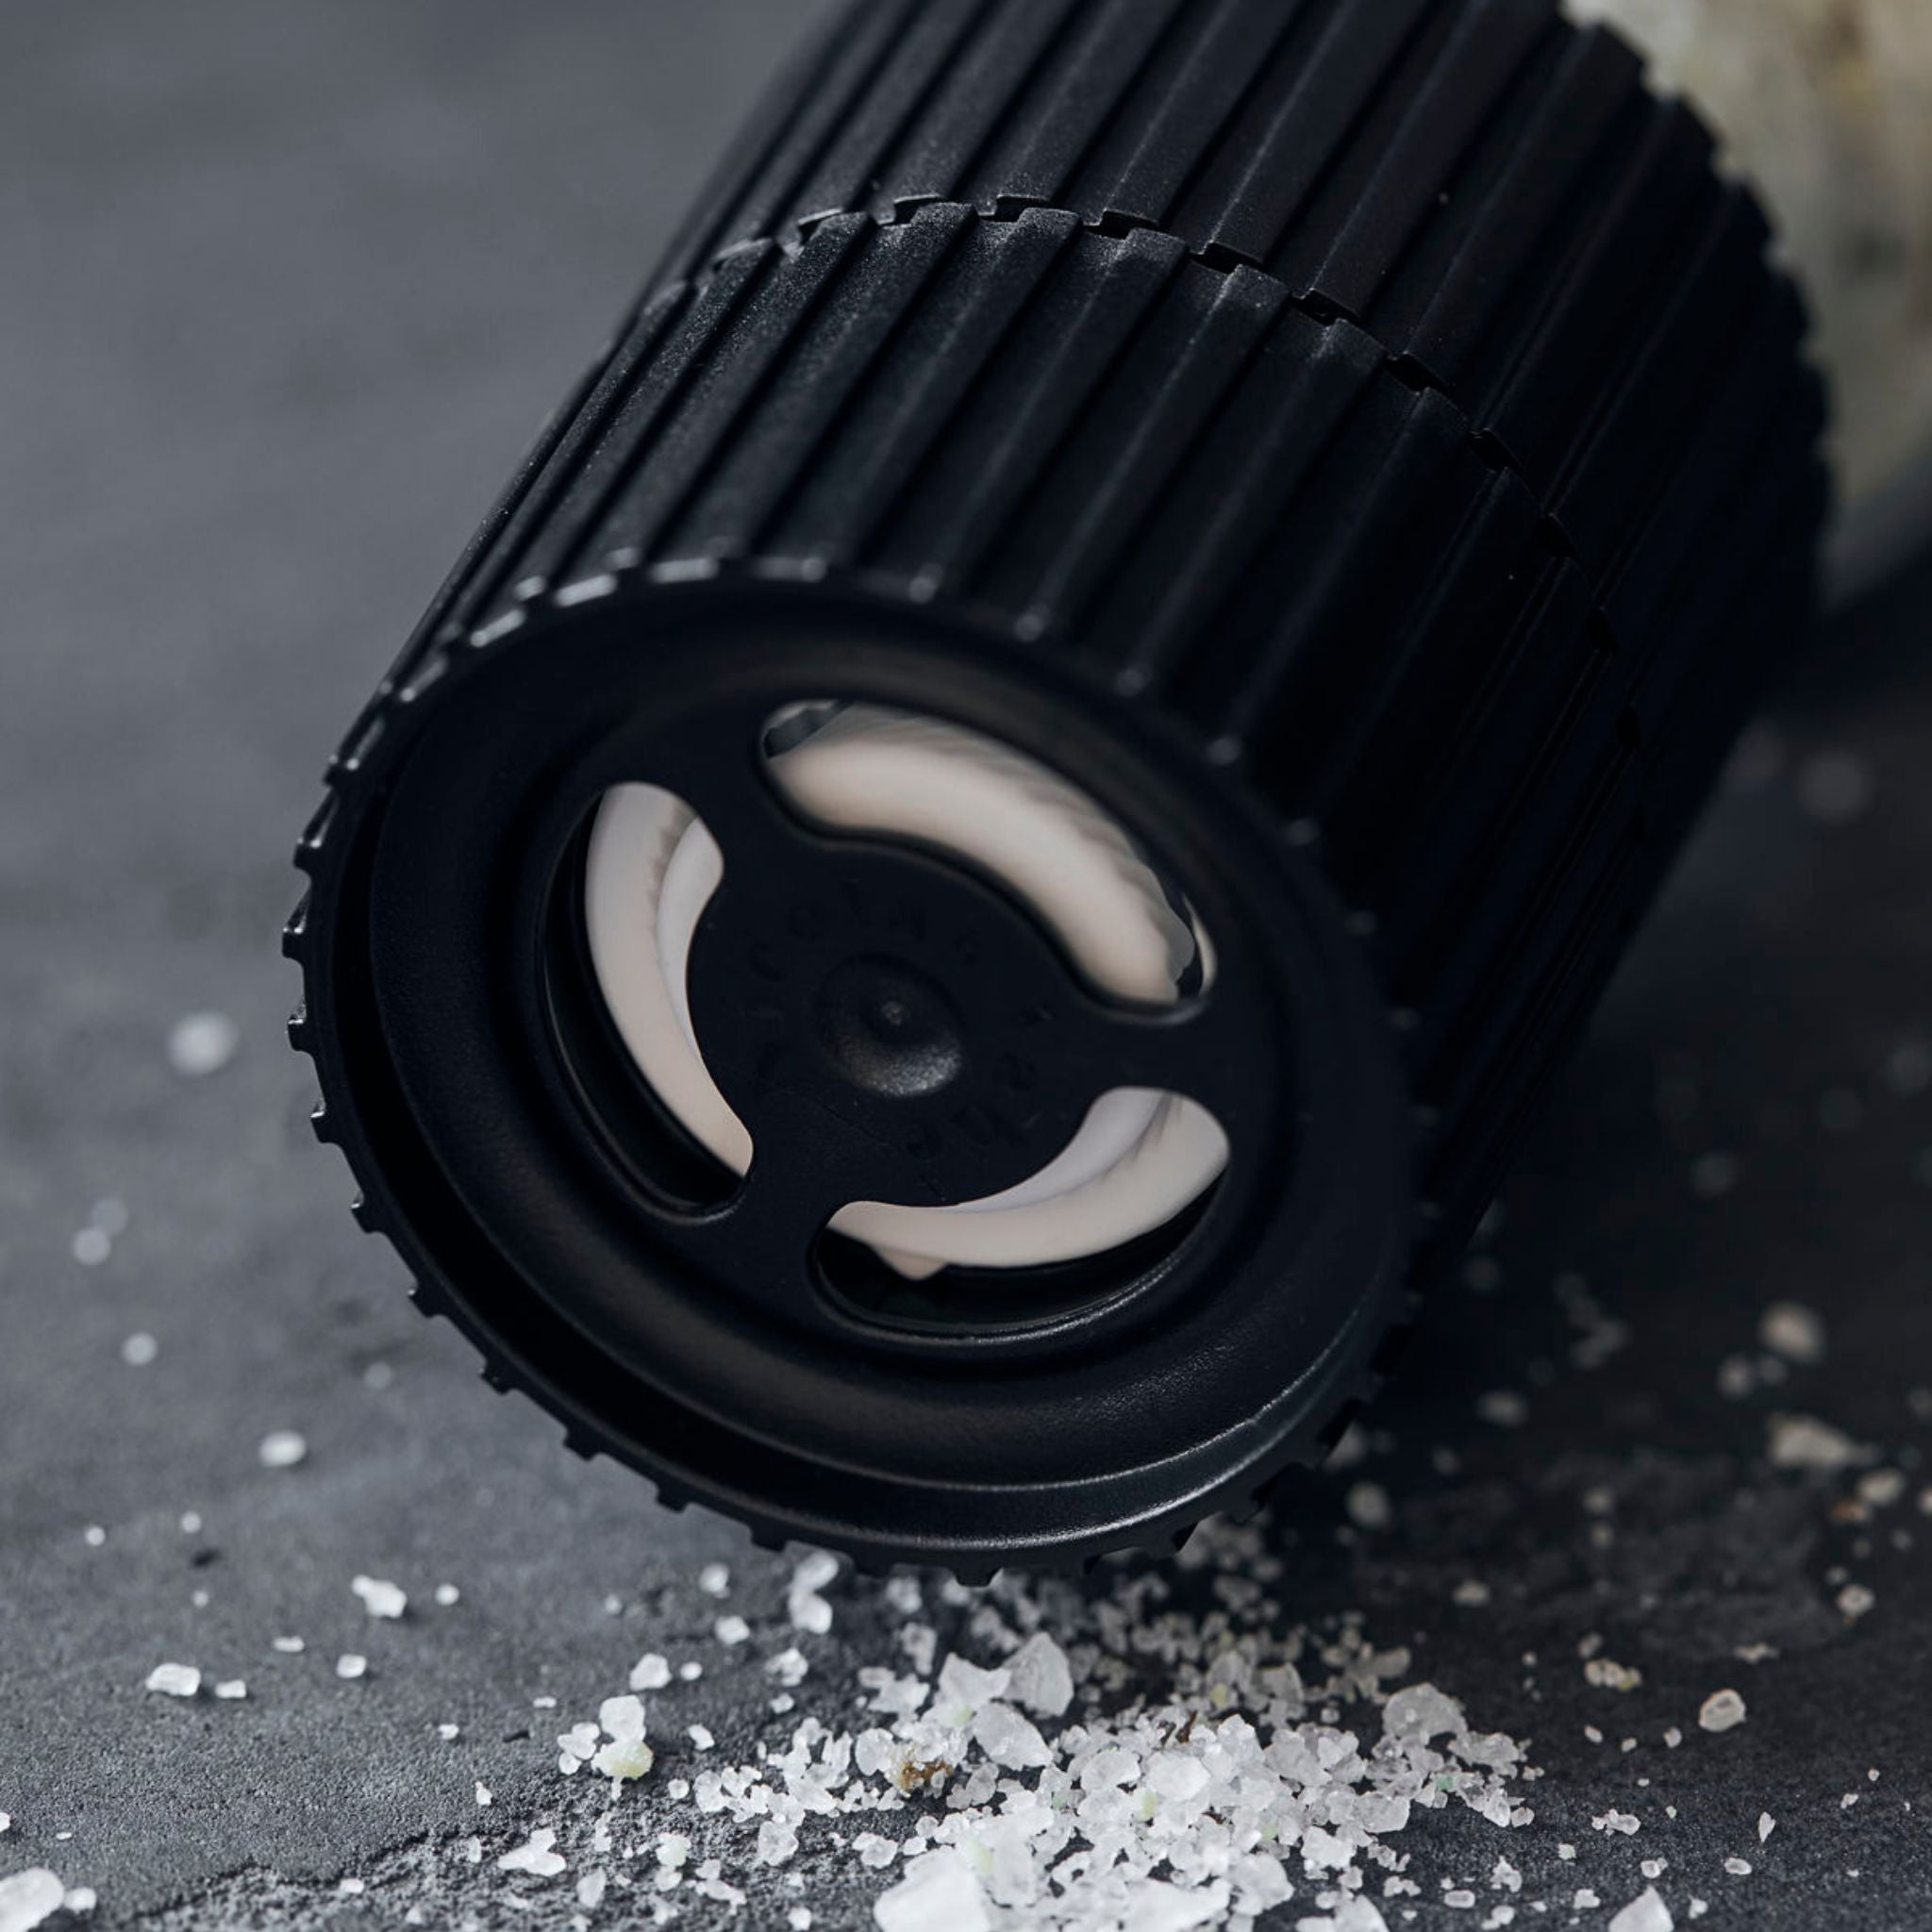 Simply Elevated - This popular salt with parmesan cheese and basil is an essential item in any kitchen. This salt is especially good with pasta dishes and pizza. The salt comes in a handy grinder with two settings - a fine and coarse setting. 